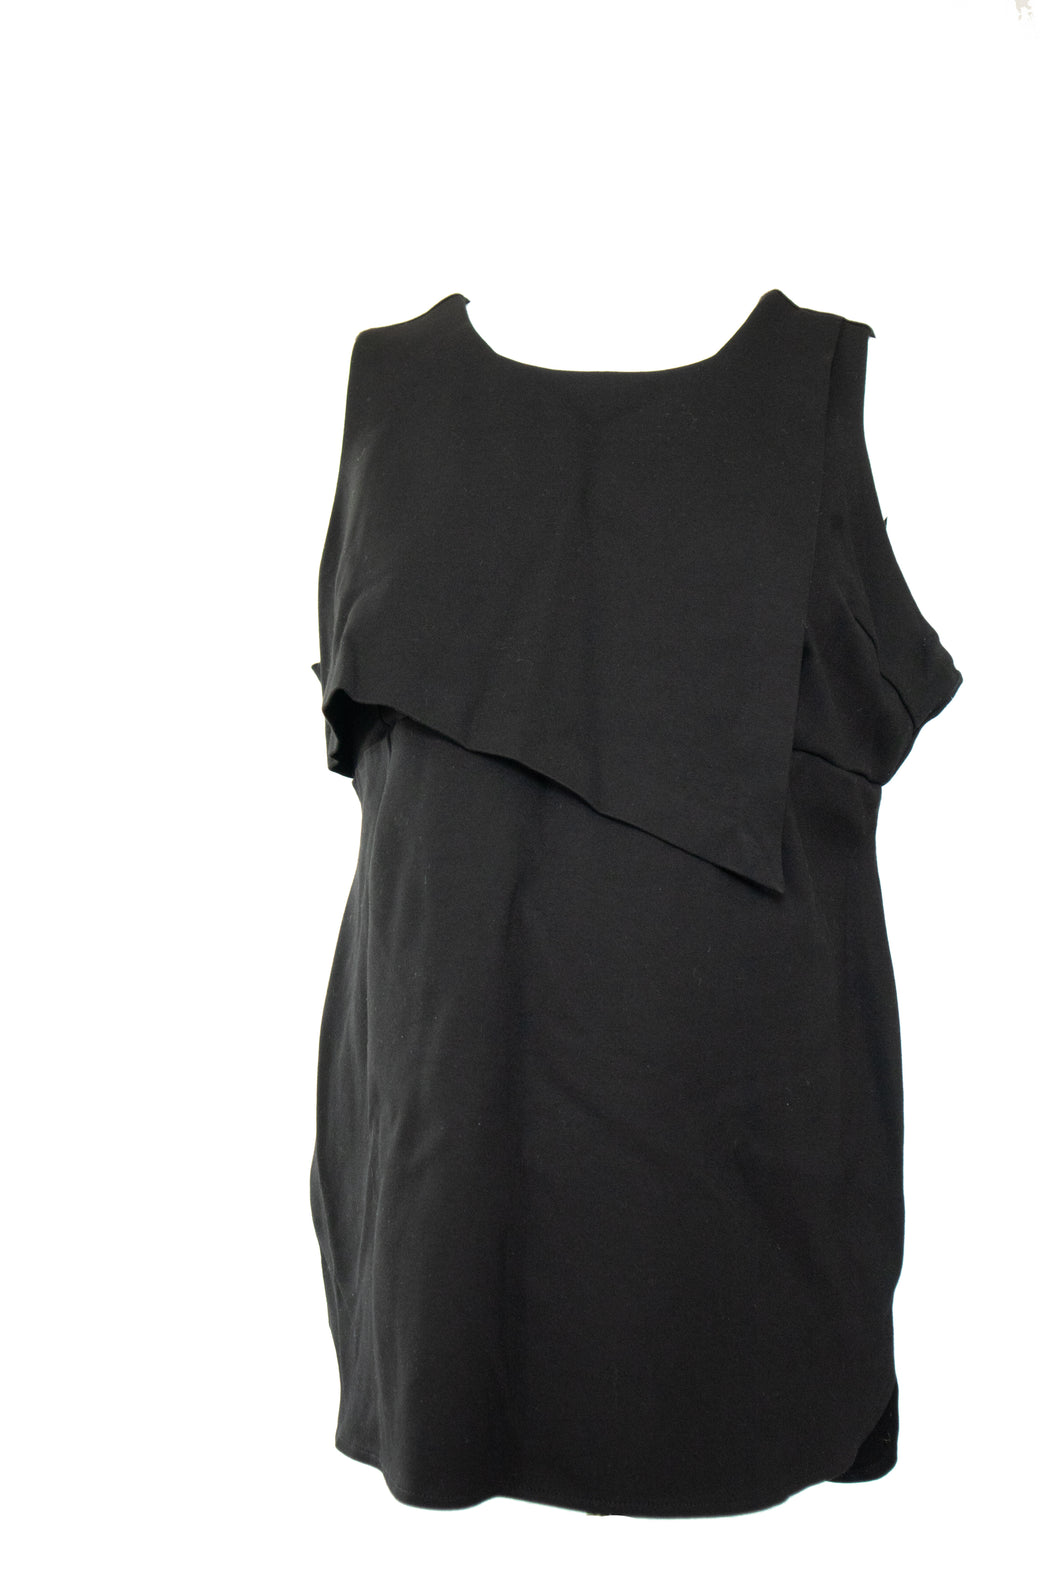 DUE DATE XXL Thyme Maternity Black Blouse